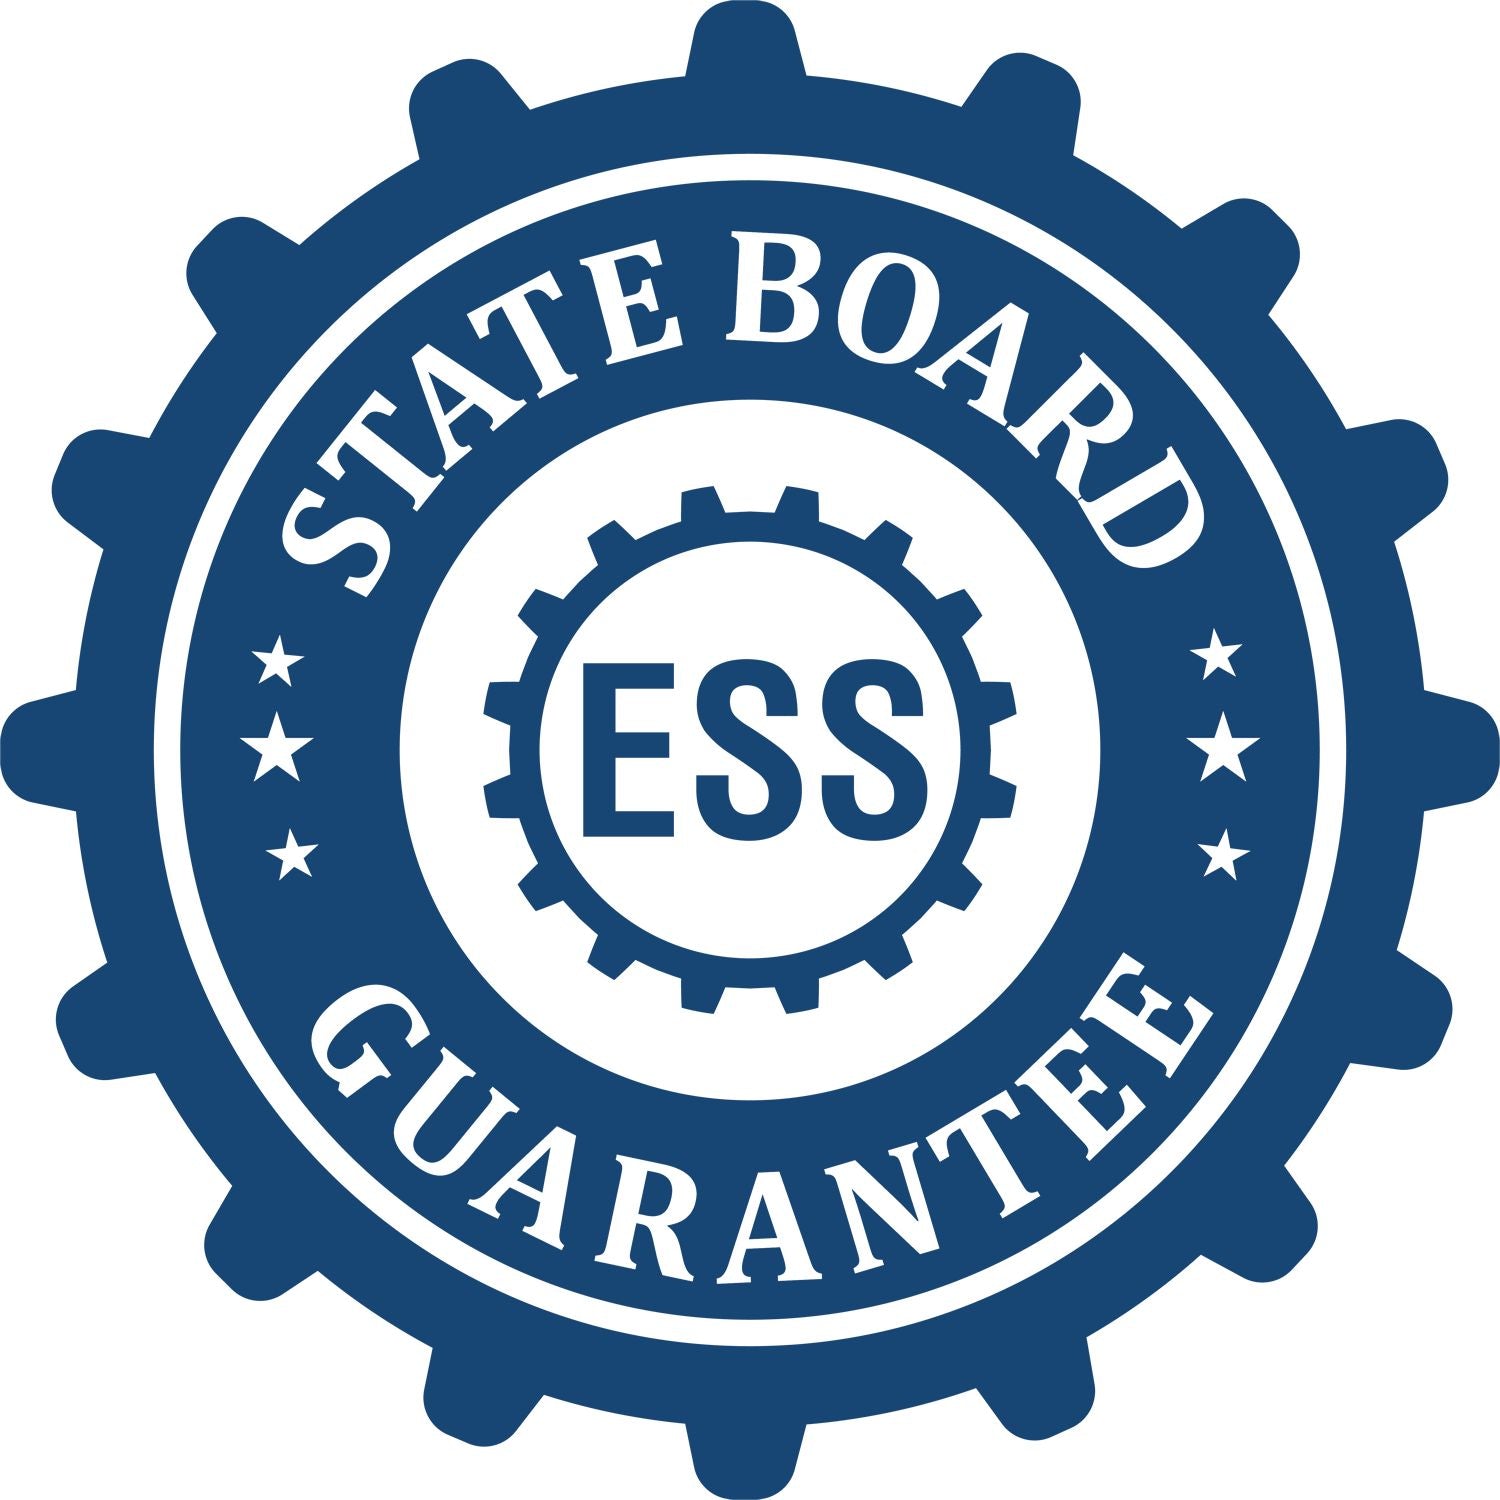 An emblem in a gear shape illustrating a state board guarantee for the Premium MaxLight Pre-Inked Delaware Engineering Stamp product.